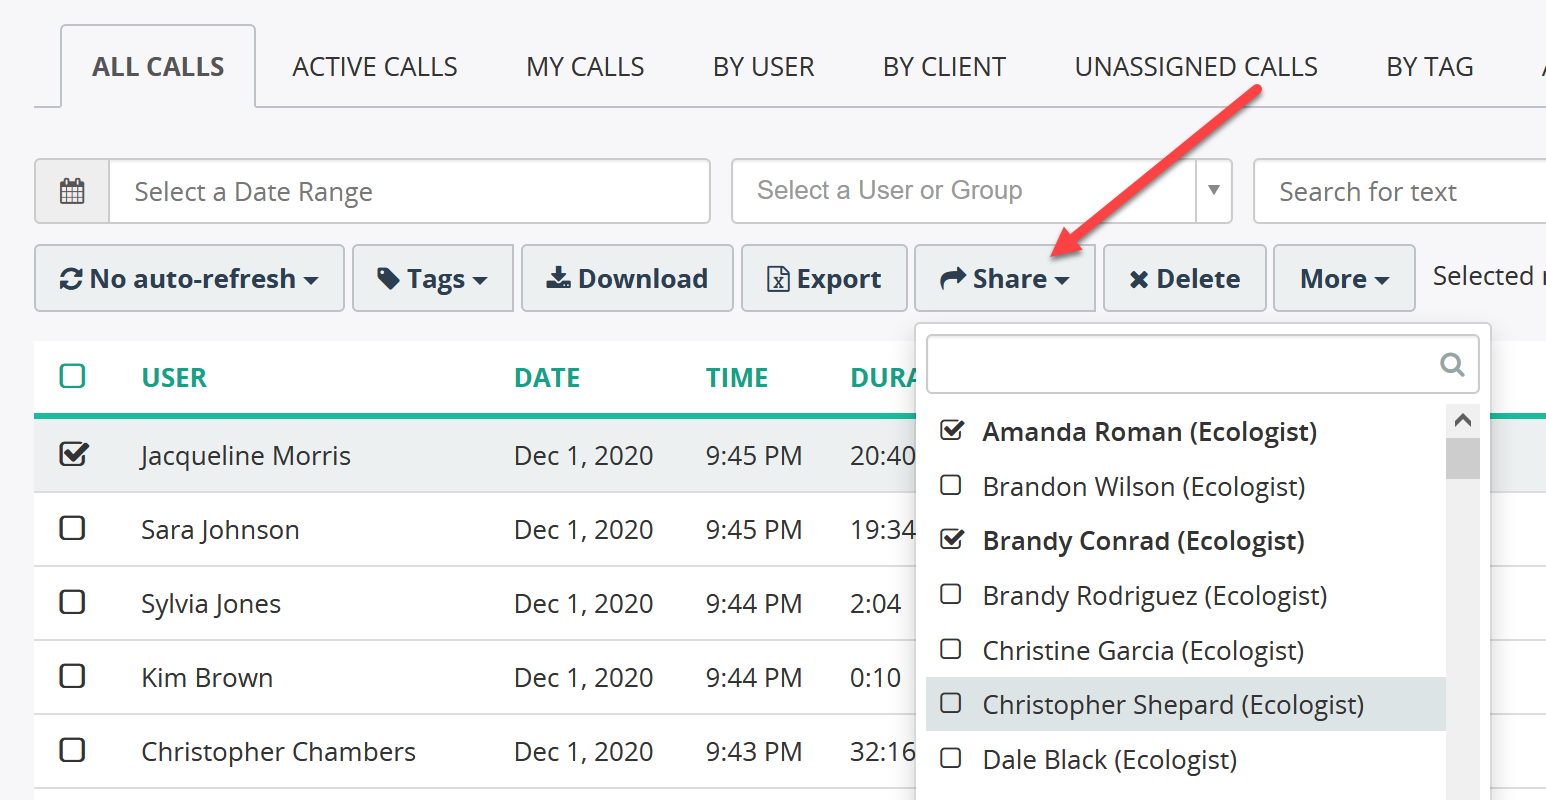 Add ability to share call recordings with other users